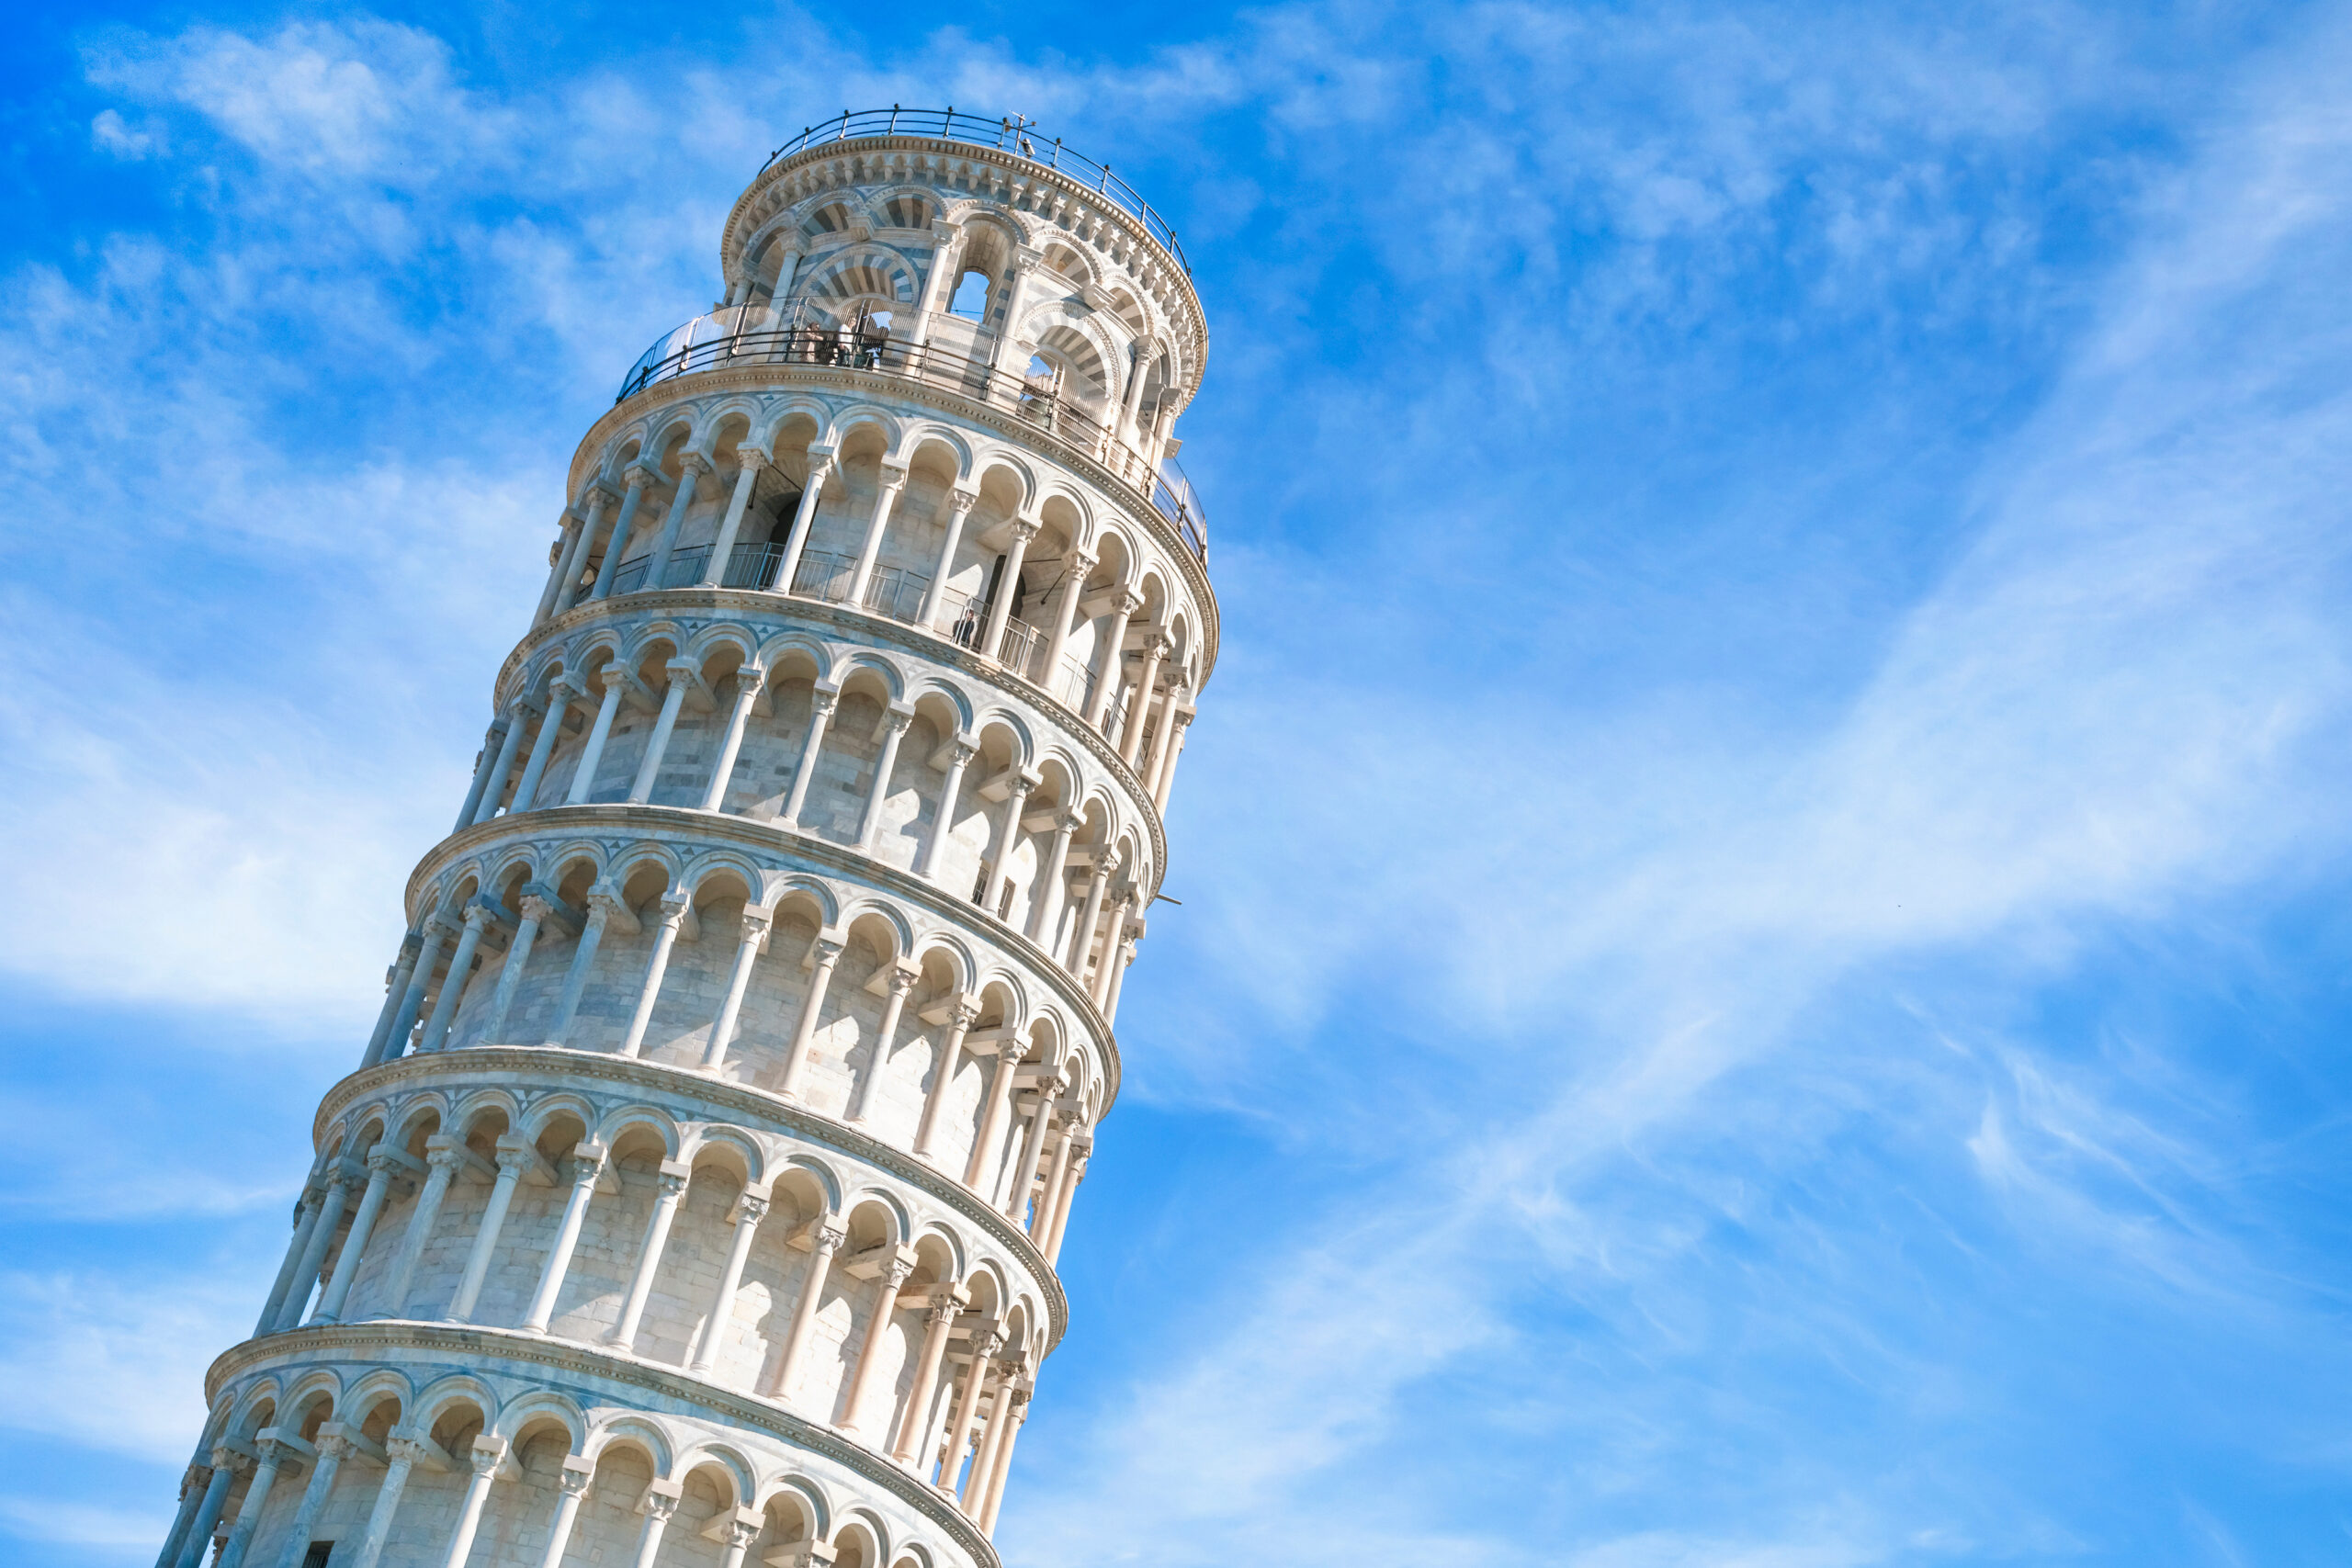 4. The Leaning Tower of Pisa, Italy